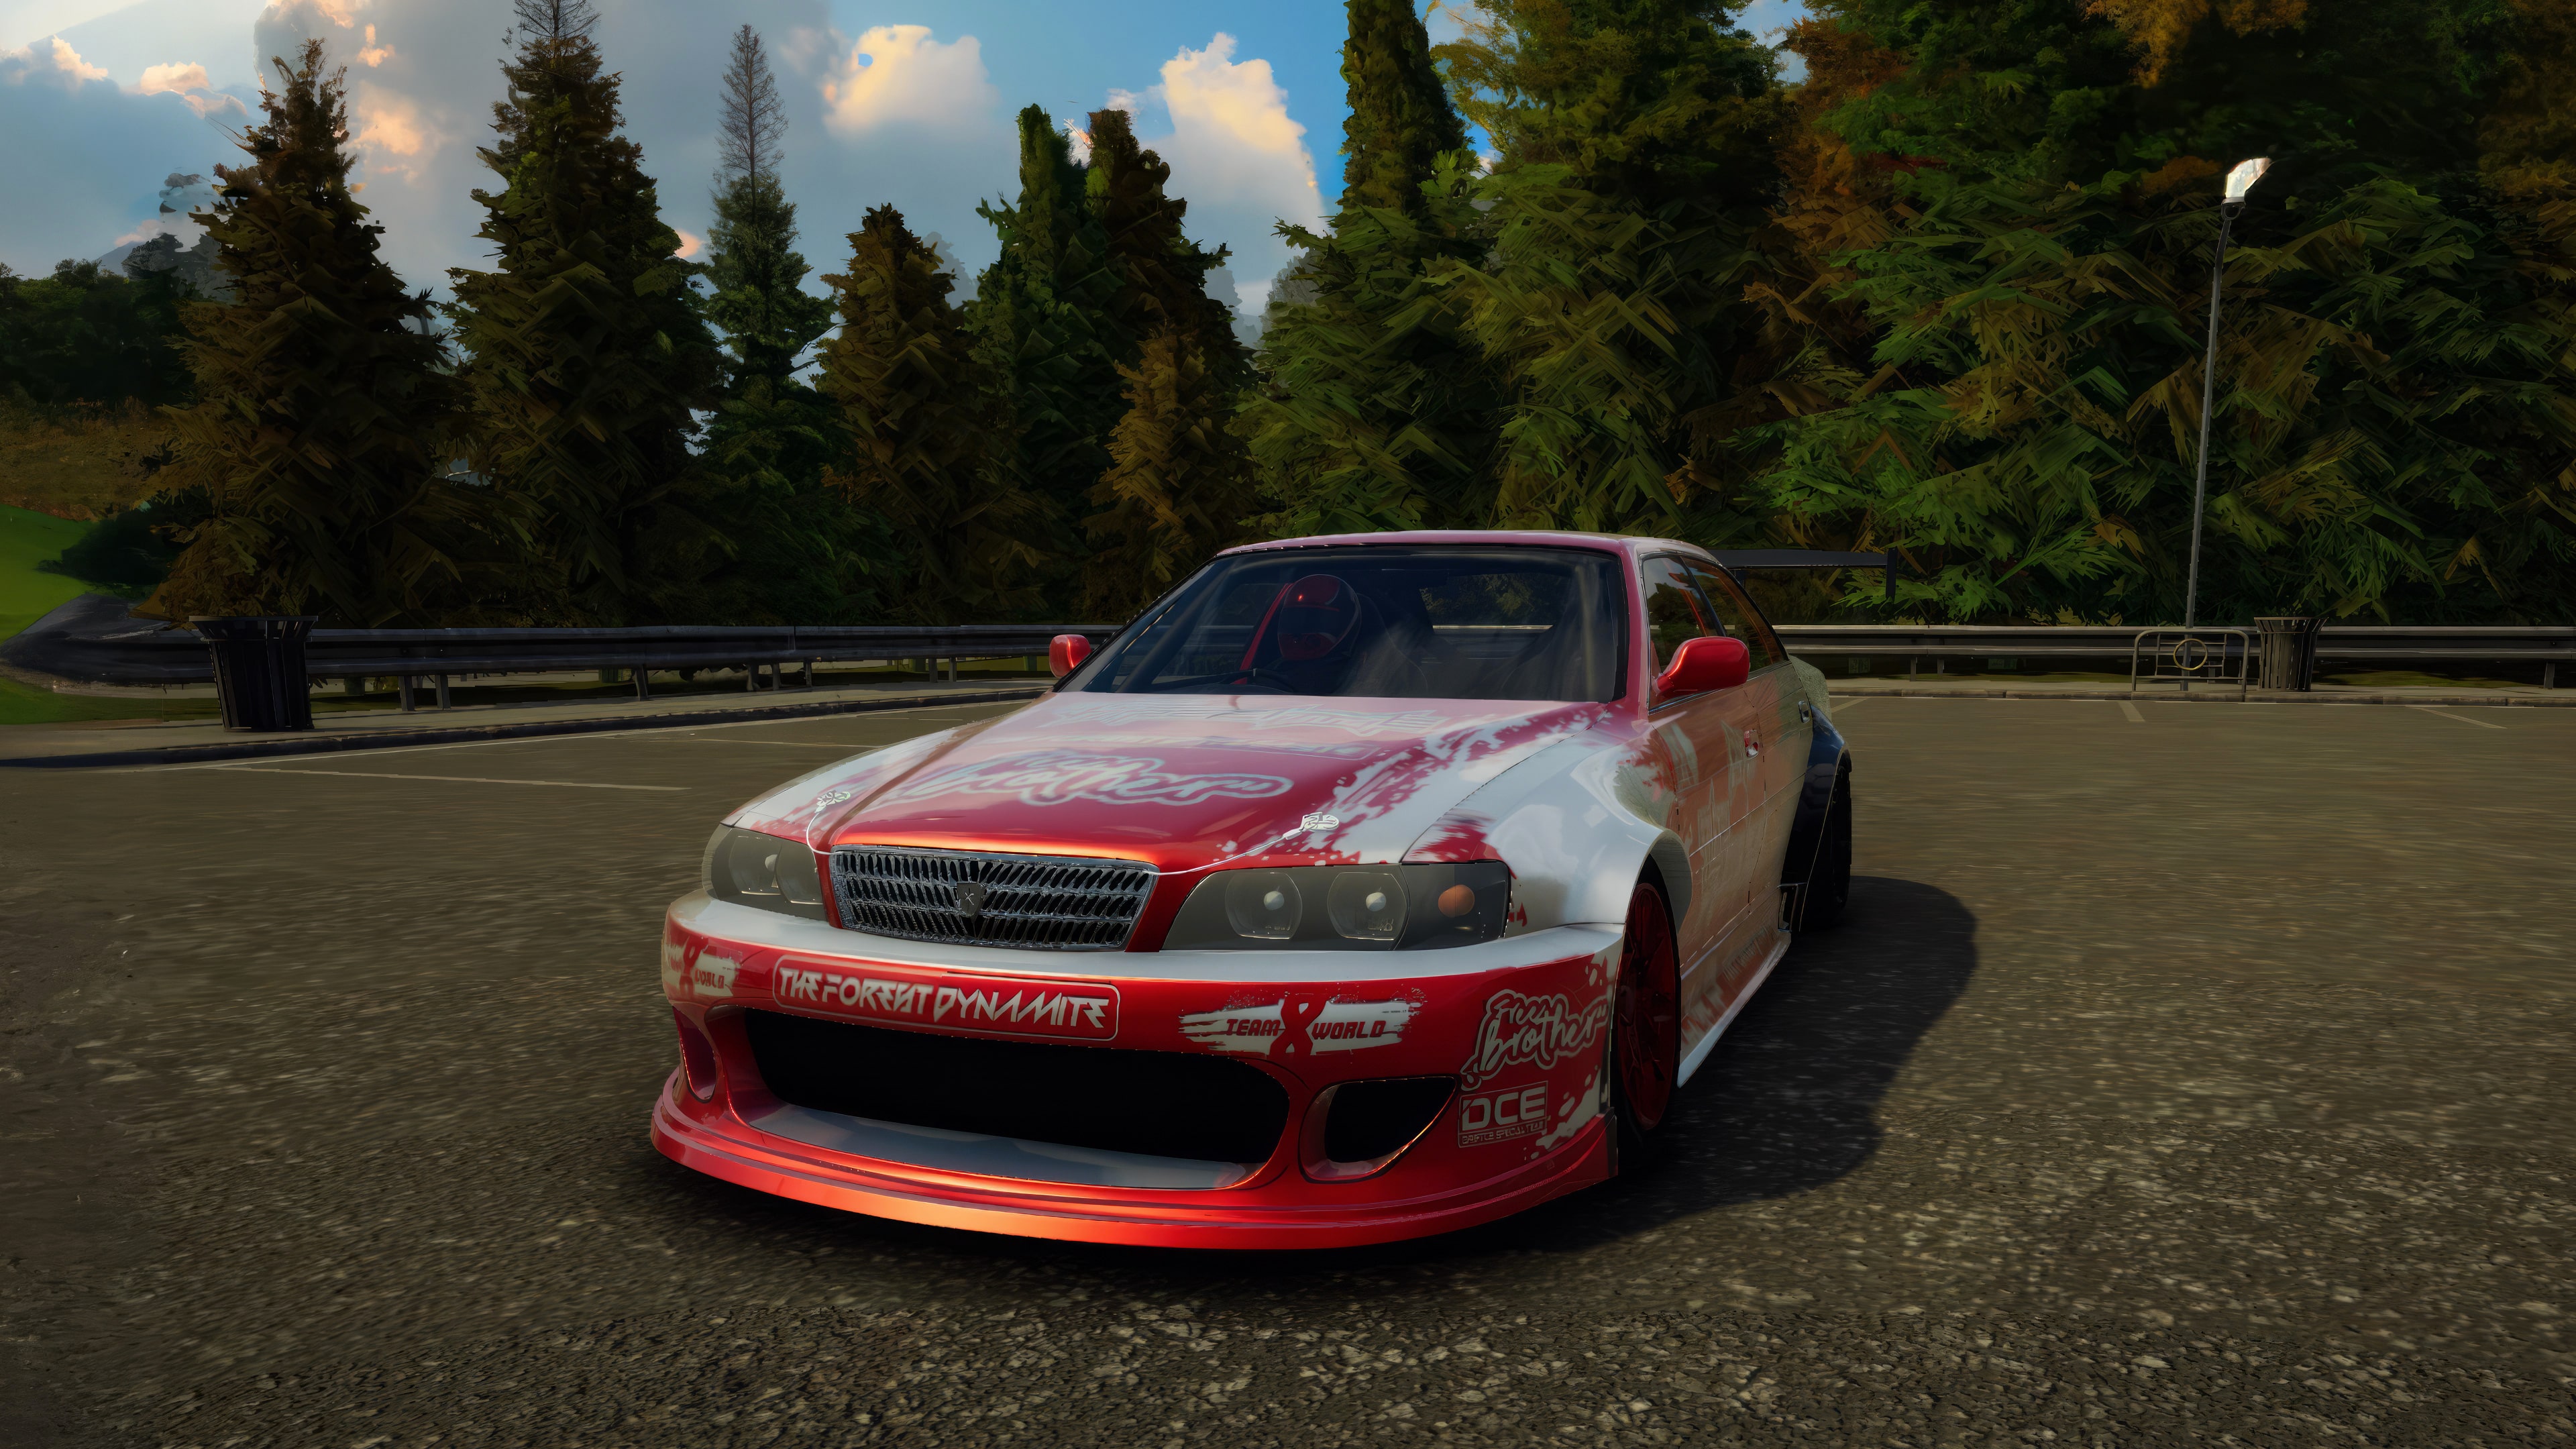 DRIFTCE Toyota Chaser JZX100 DLC